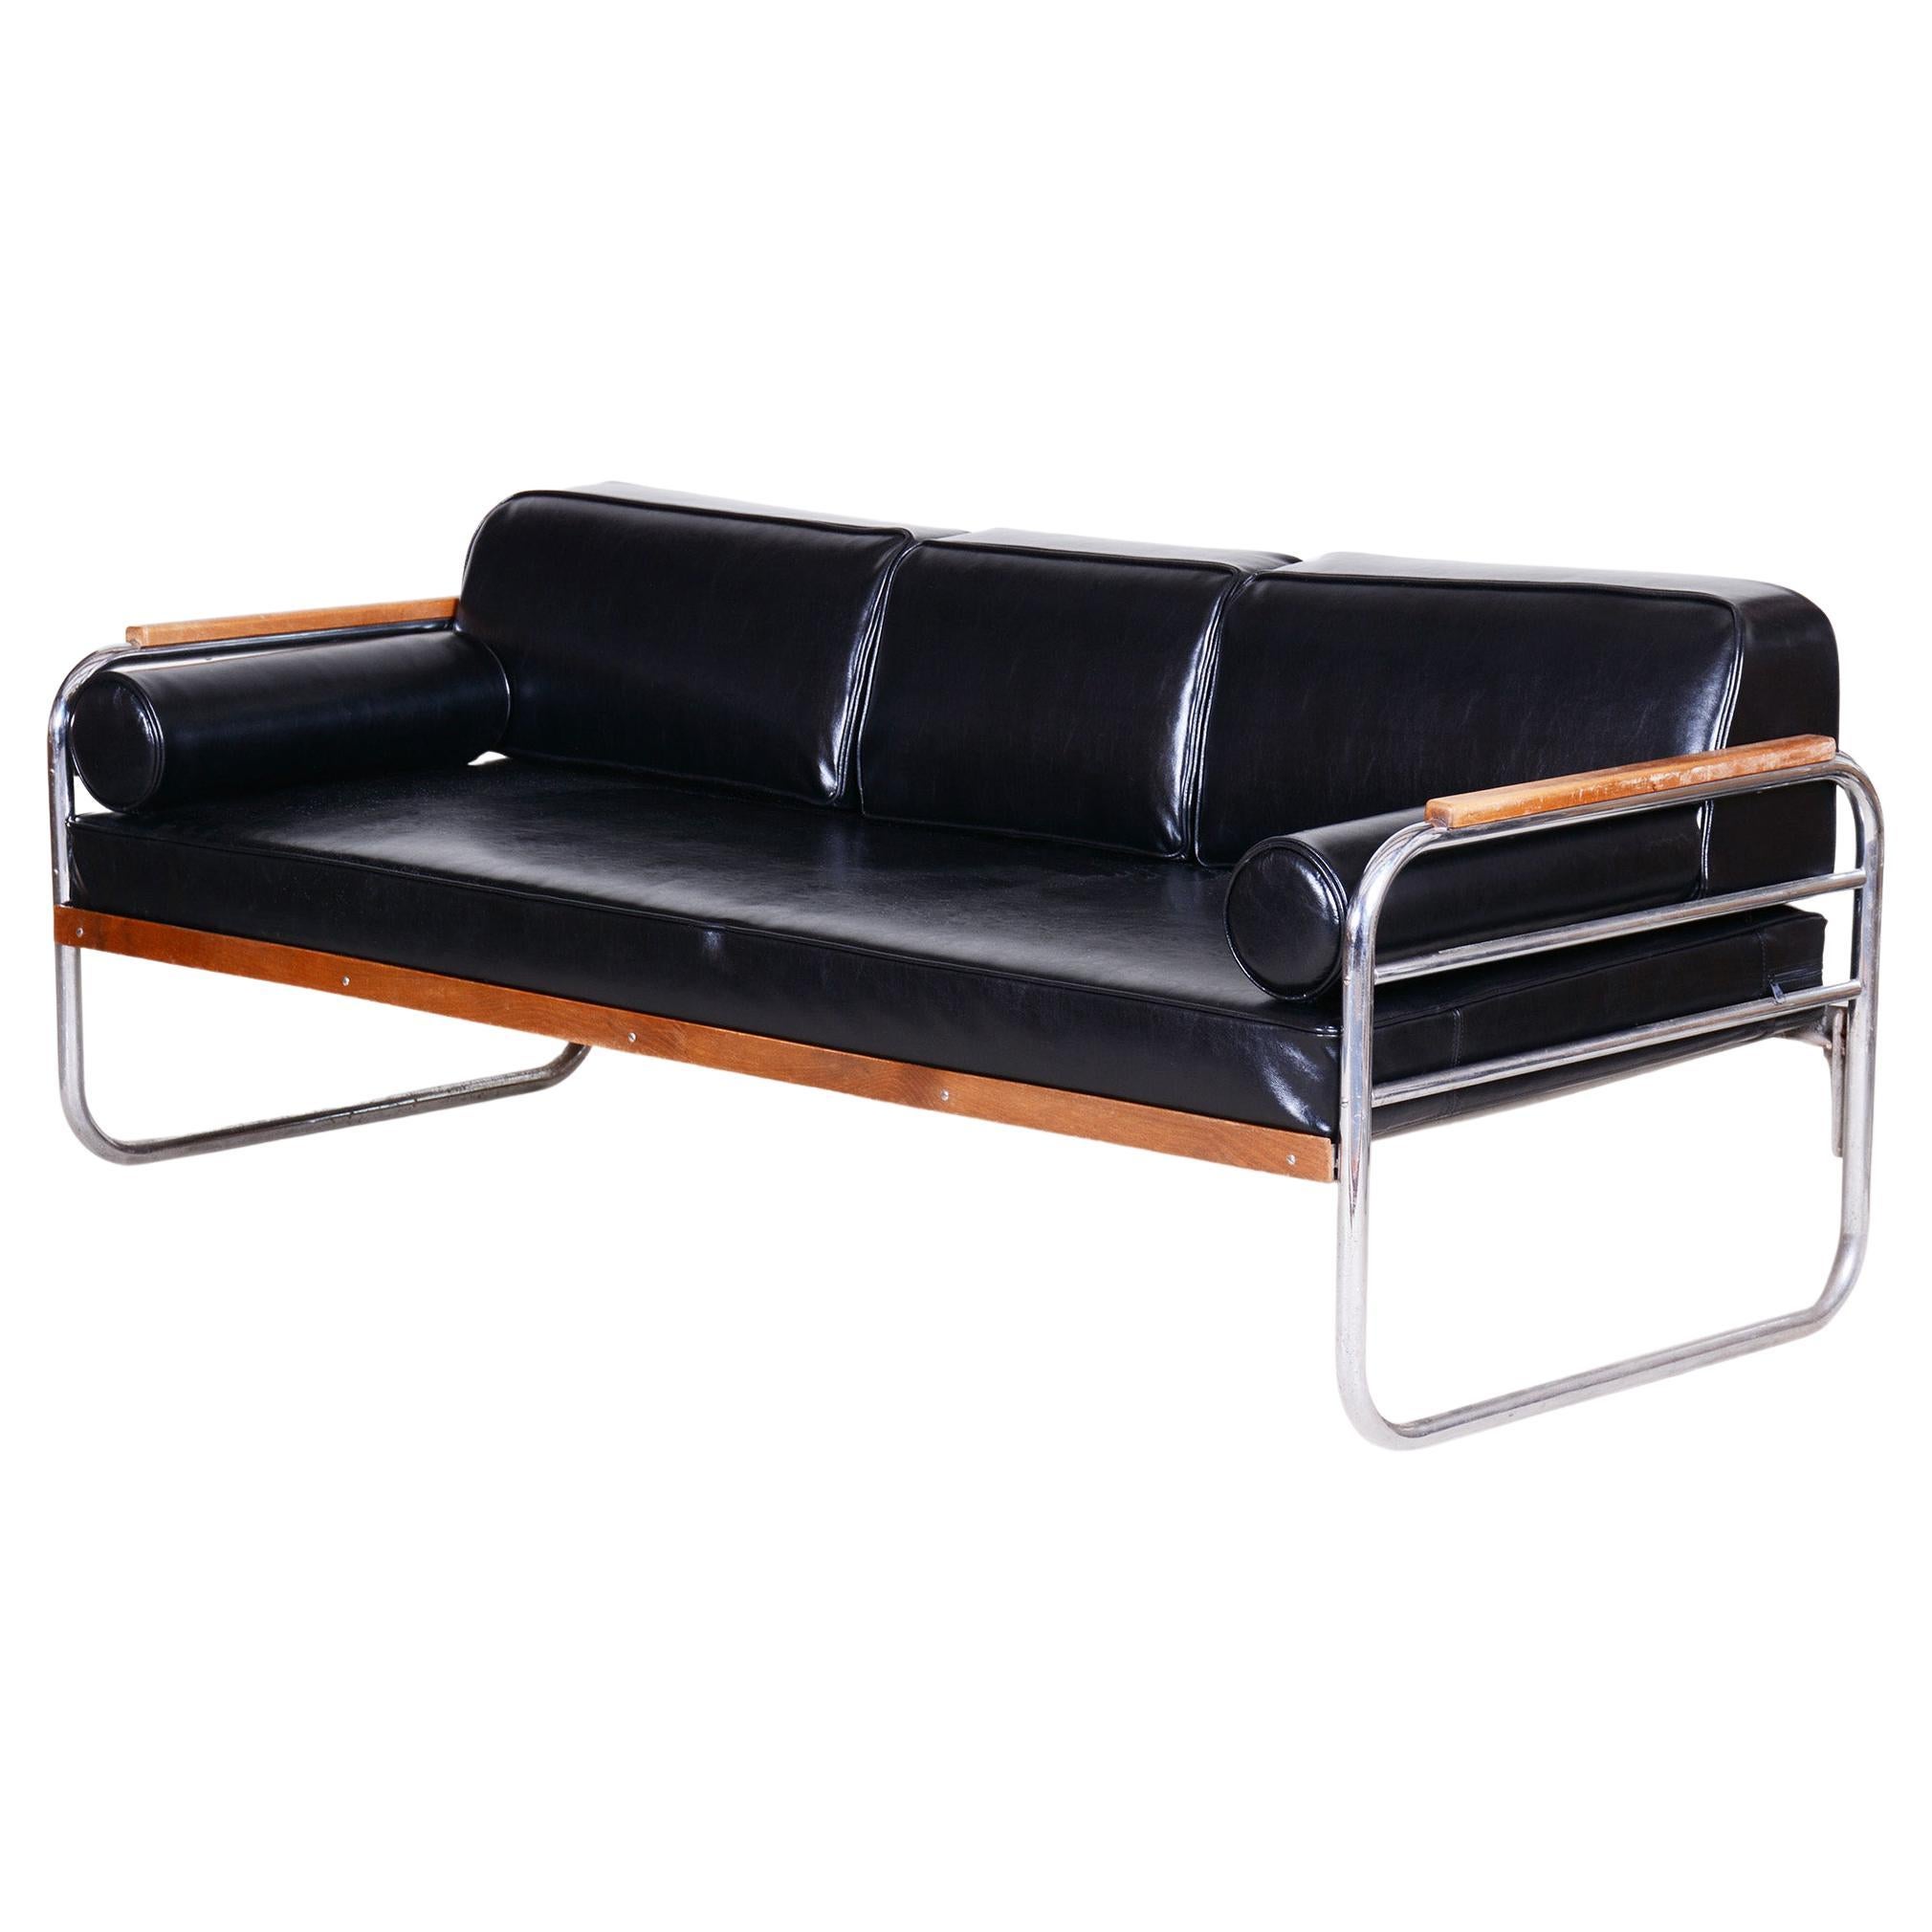 Black Leather Sofa Made by Thonet in 1930s Czechia For Sale at 1stDibs